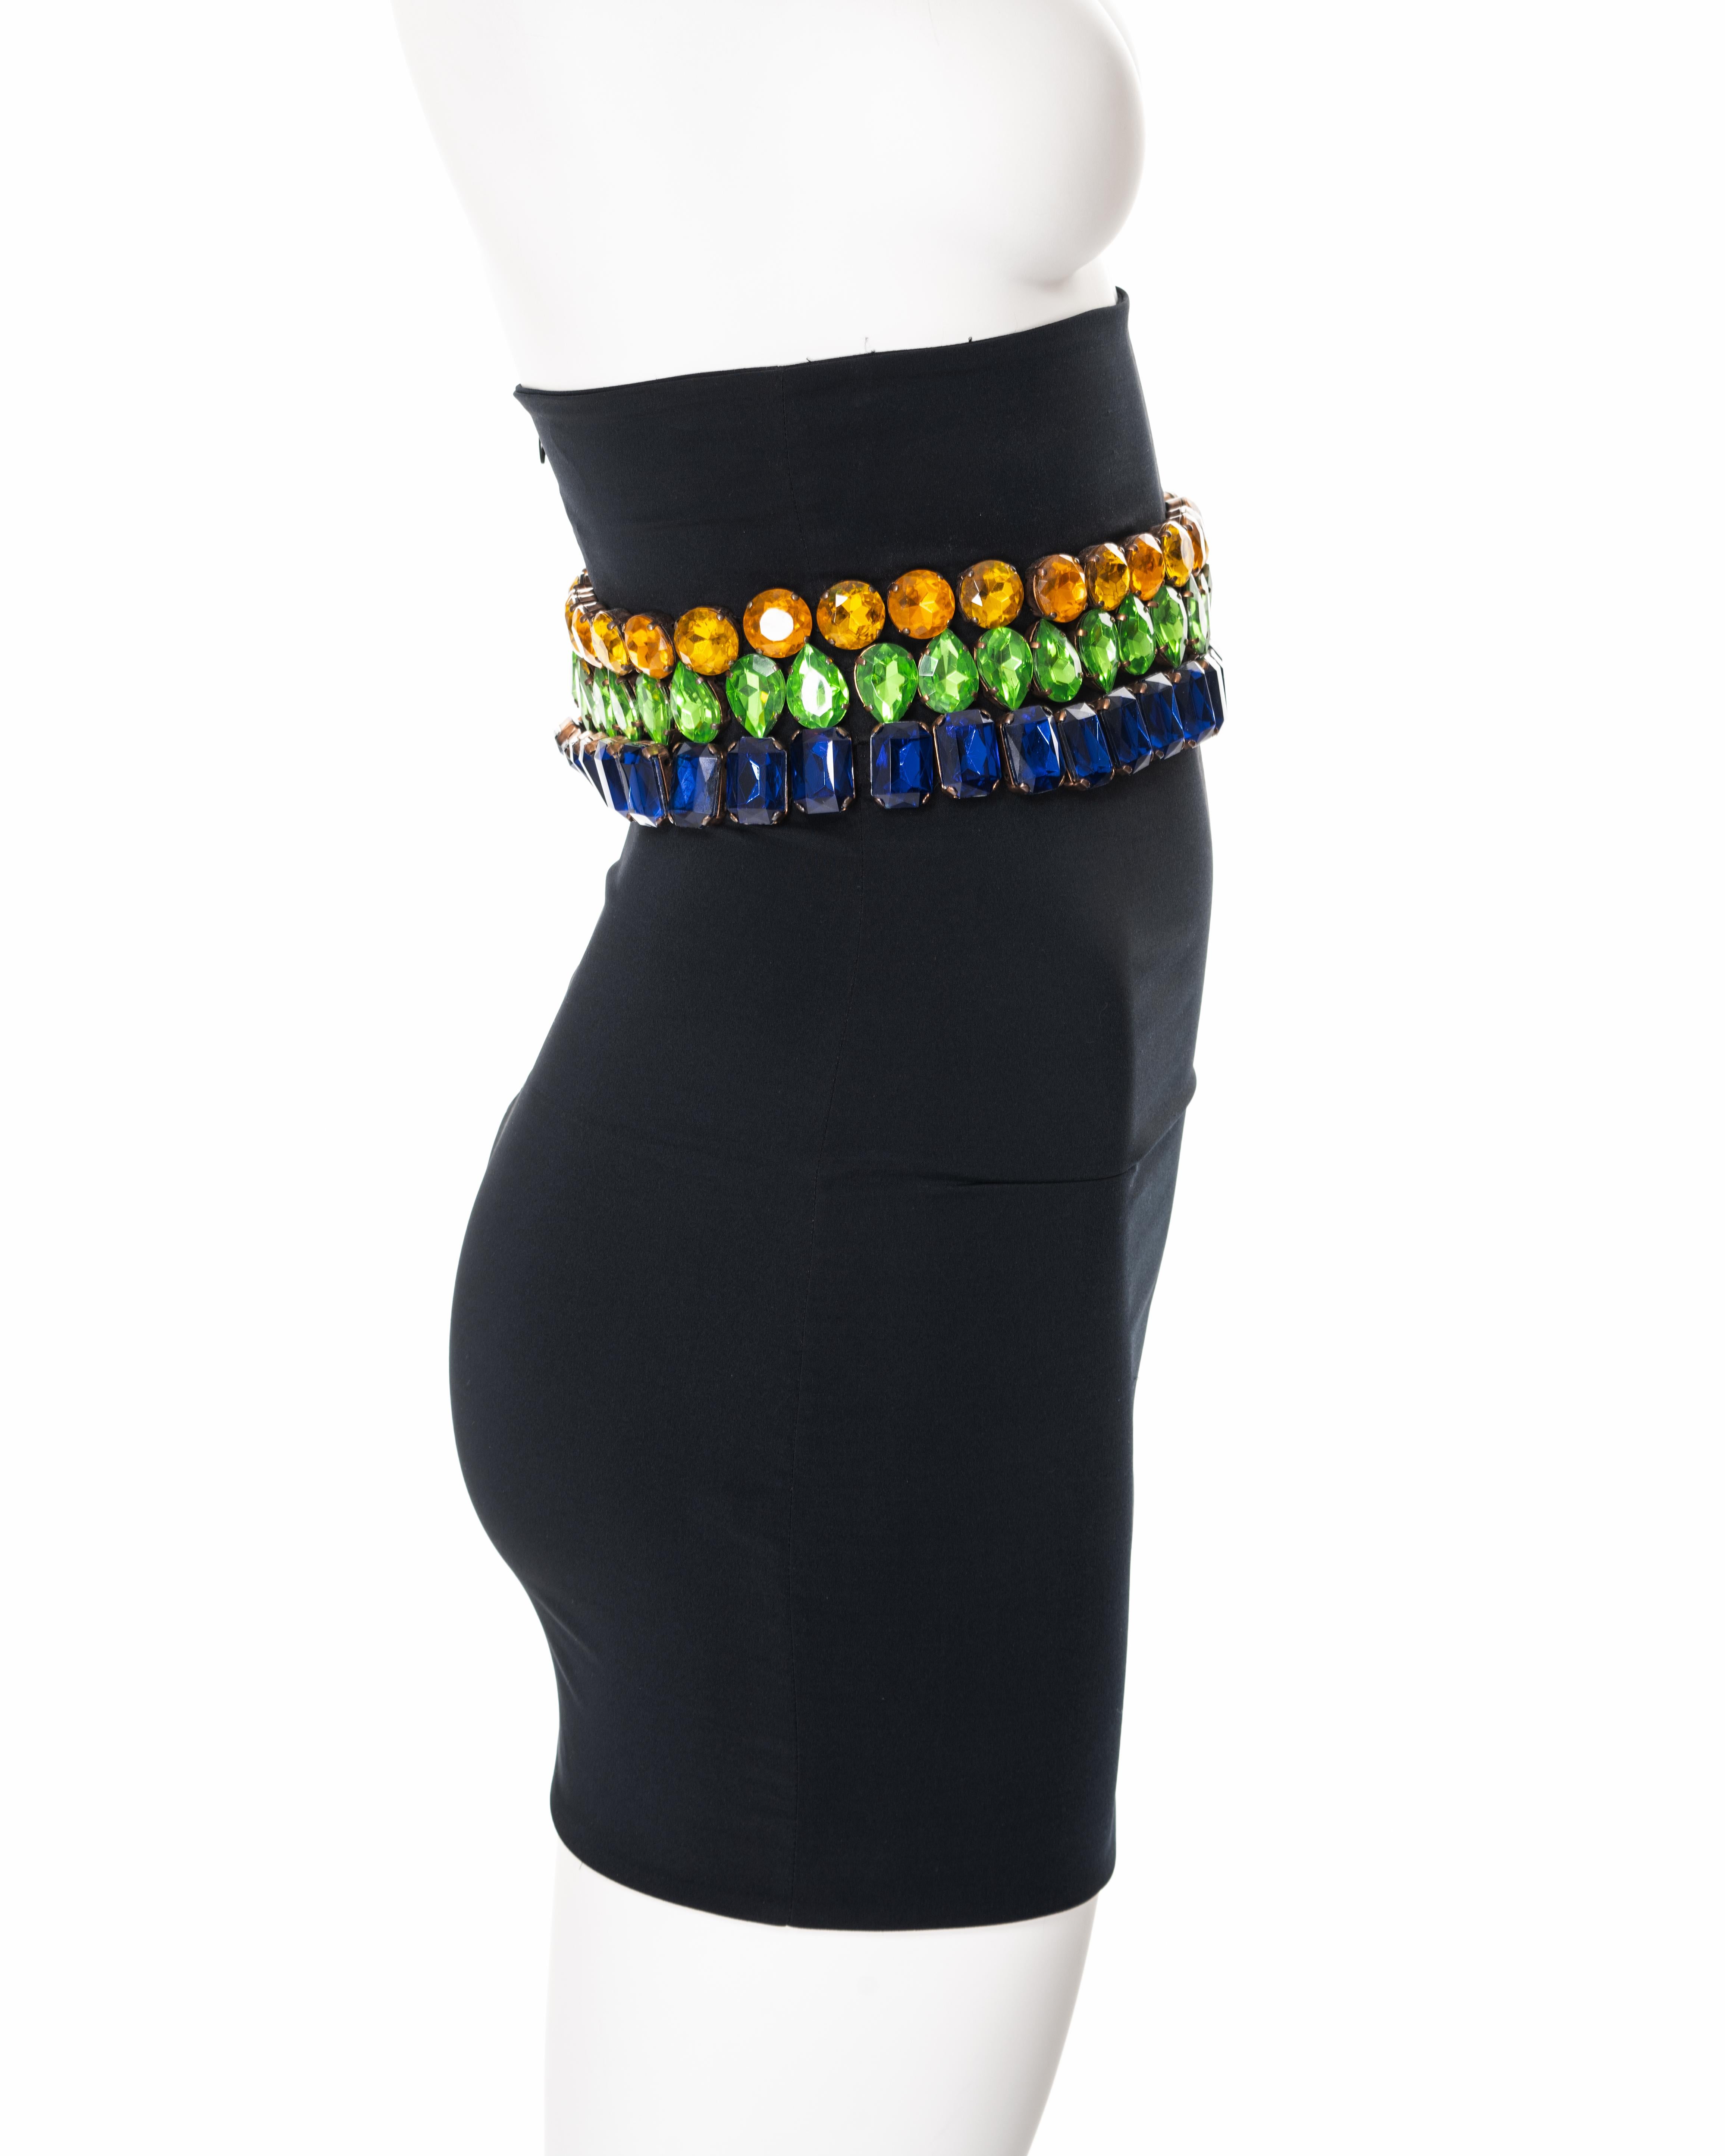 ▪ Dolce & Gabbana bejewelled mini skirt
▪ Sold by One of a Kind Archive
▪ Fall-Winter 1991
▪ Constructed from a black nylon and lycra blend fabric 
▪ Large crystal adornments in amber, green and blue 
▪ High-waisted 
▪ Figure hugging fit 
▪ Size IT